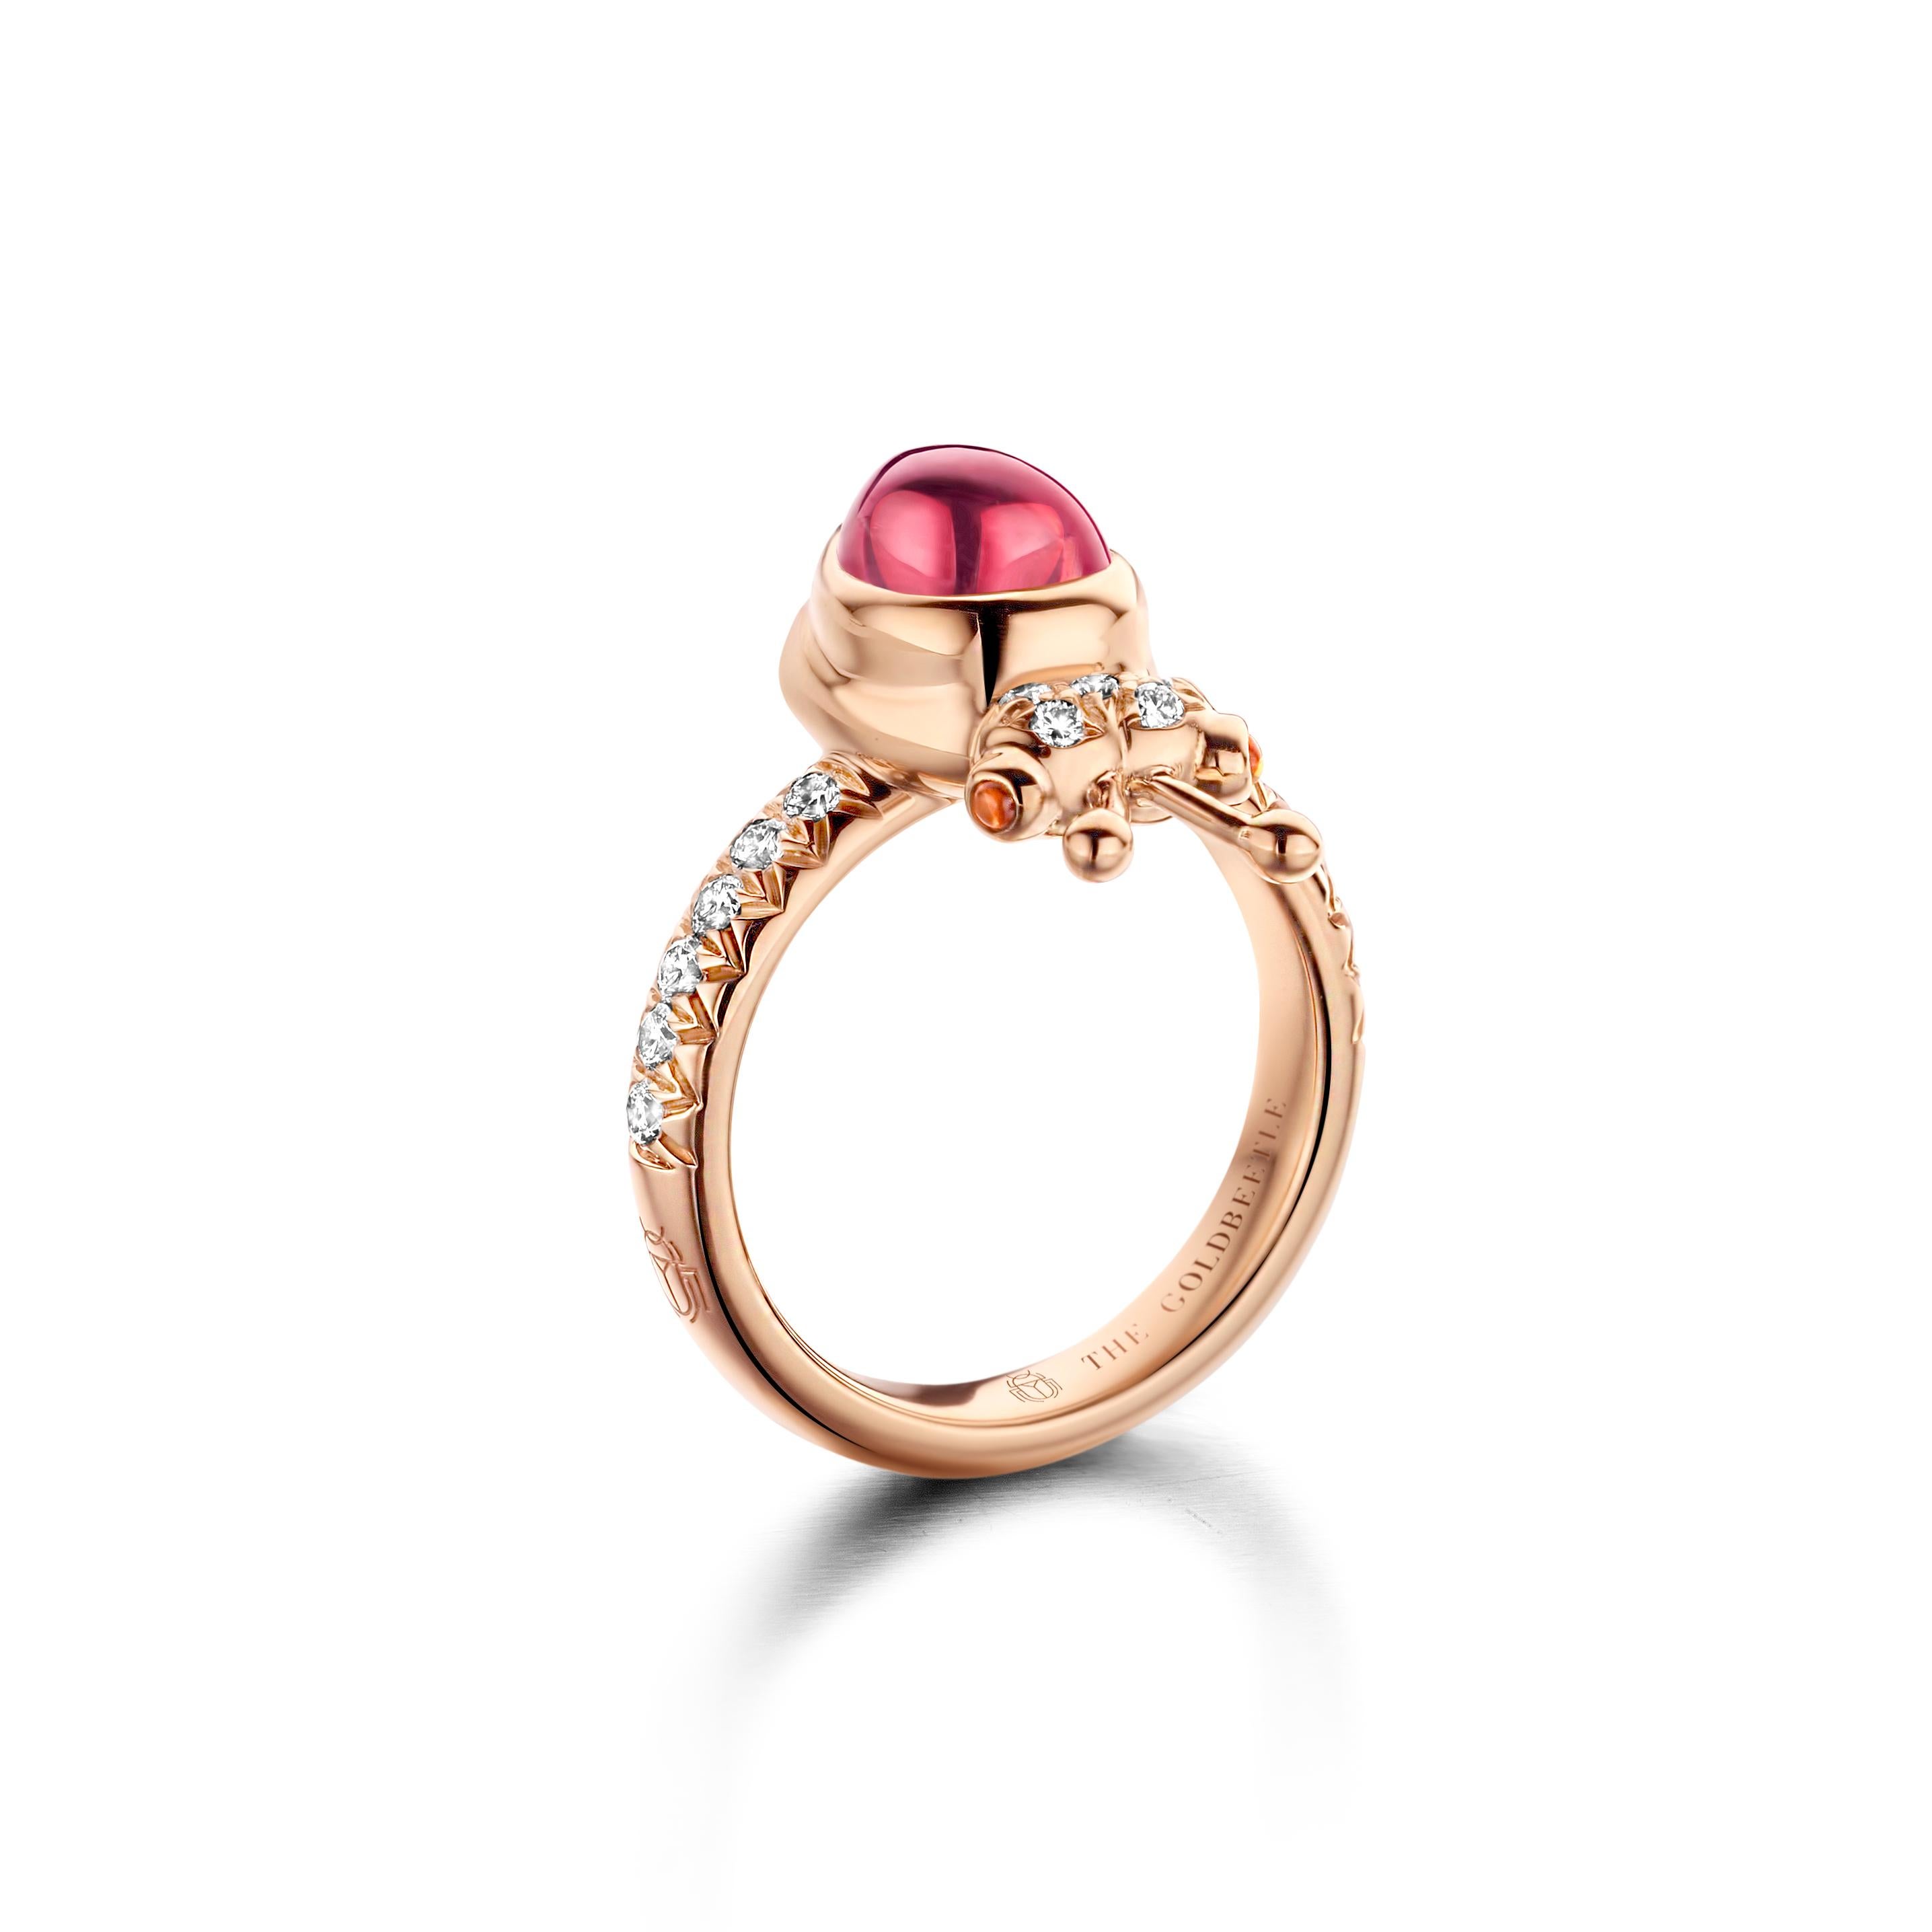 One of a kind lucky beetle ring in 18K rose gold 8,6 g set with the finest diamonds in brilliant cut 0,34Ct (VVS/DEF quality) one natural, pink tourmaline in pear cabochon cut 1,80Ct and two tsavorites in round cabochon cut. 

Celine Roelens, a